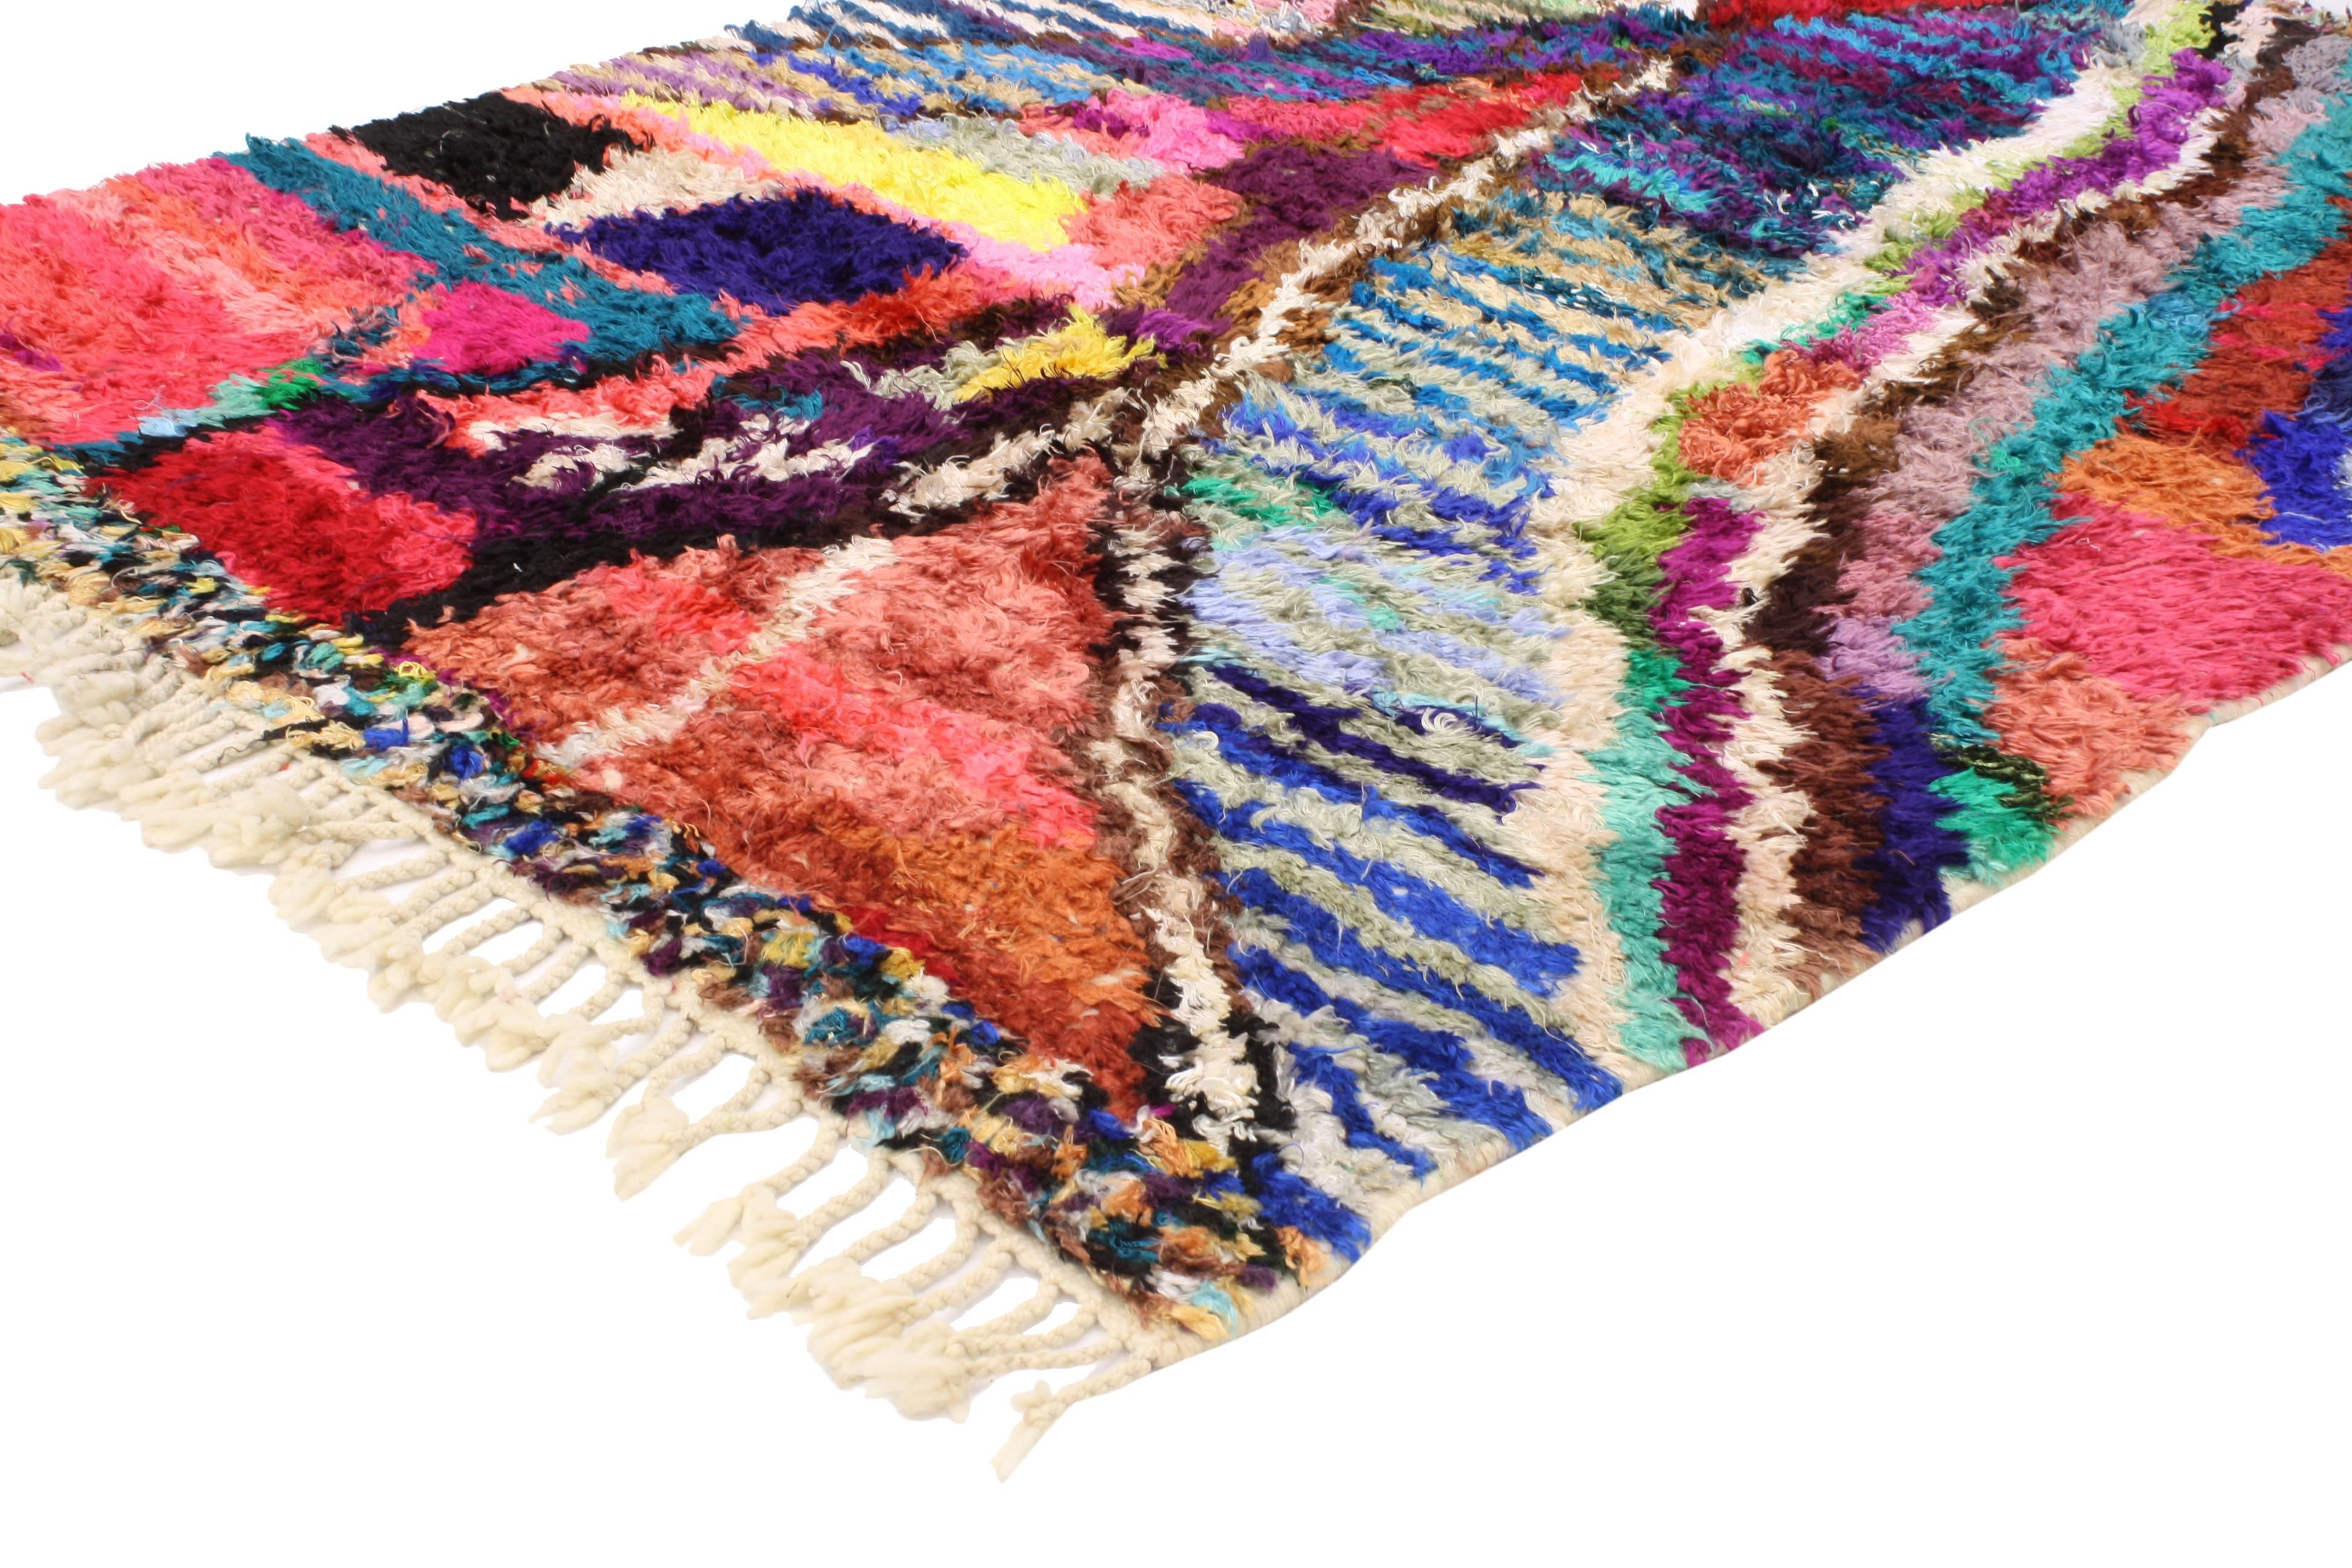 Highly stylish yet casually elegant, this modern Berber Moroccan silk rug with a contemporary abstract style rug is ideal for nearly any stylish home. This abstract design has been given a modern twist to effortlessly accompany fashionable decor.